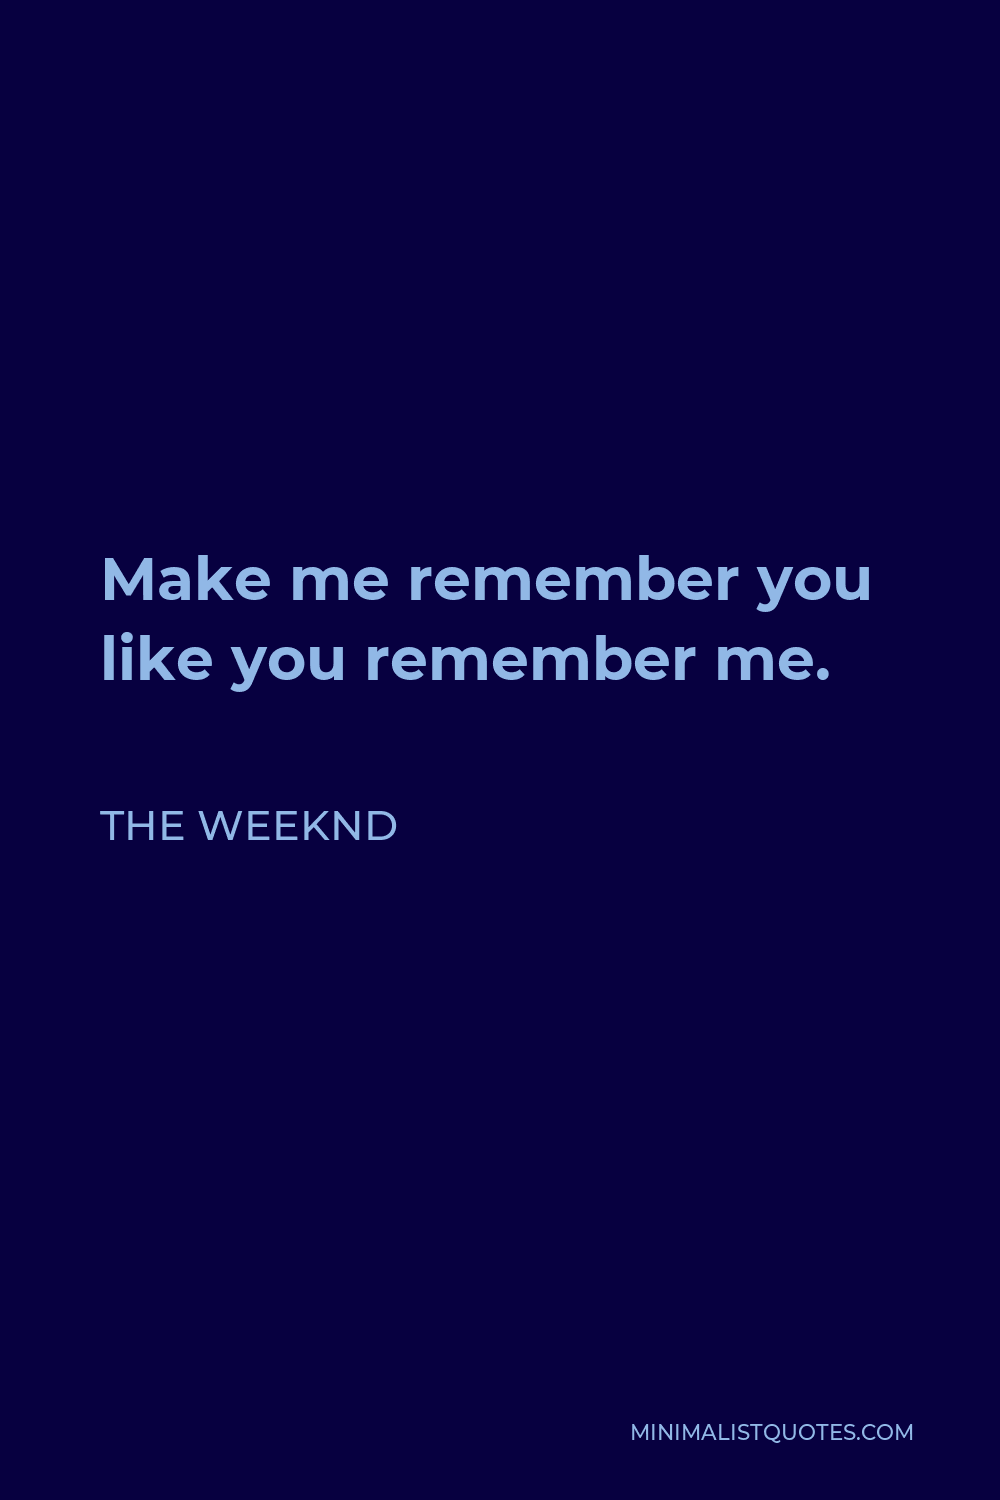 The Weeknd Quote - Make me remember you like you remember me.